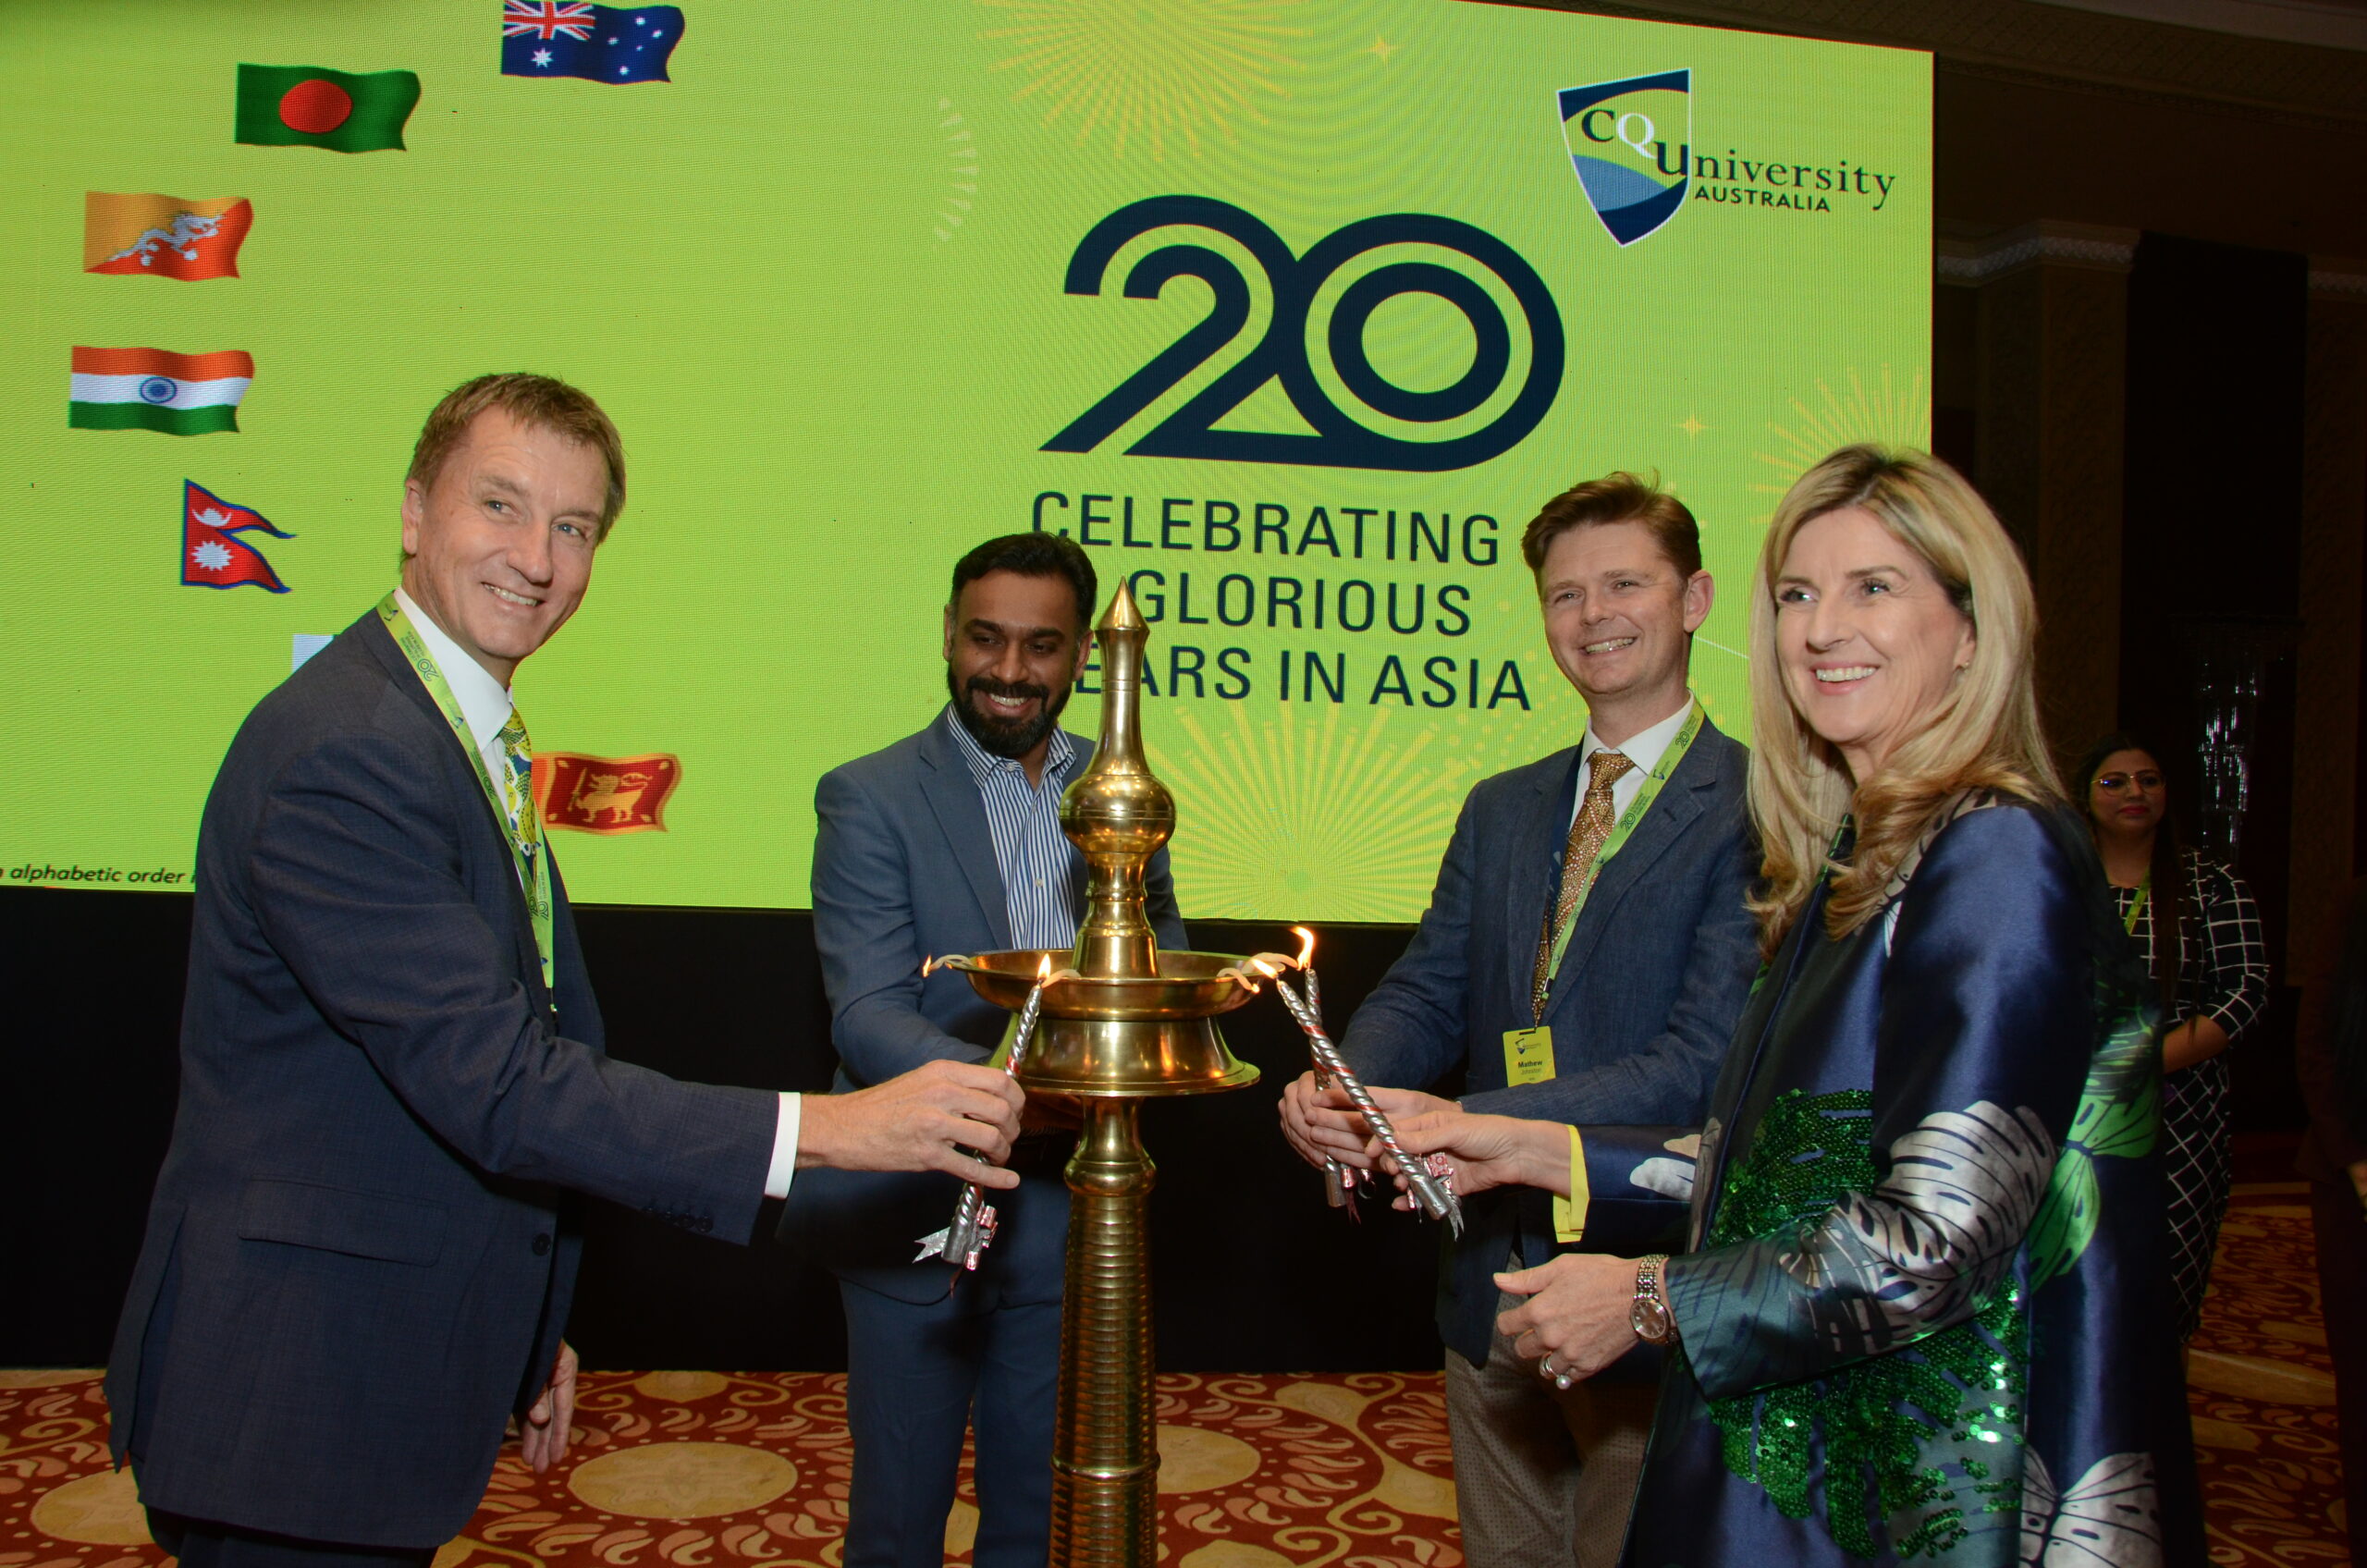 CQUniversity, Australia reflects on two decades of excellence in India and South Asia